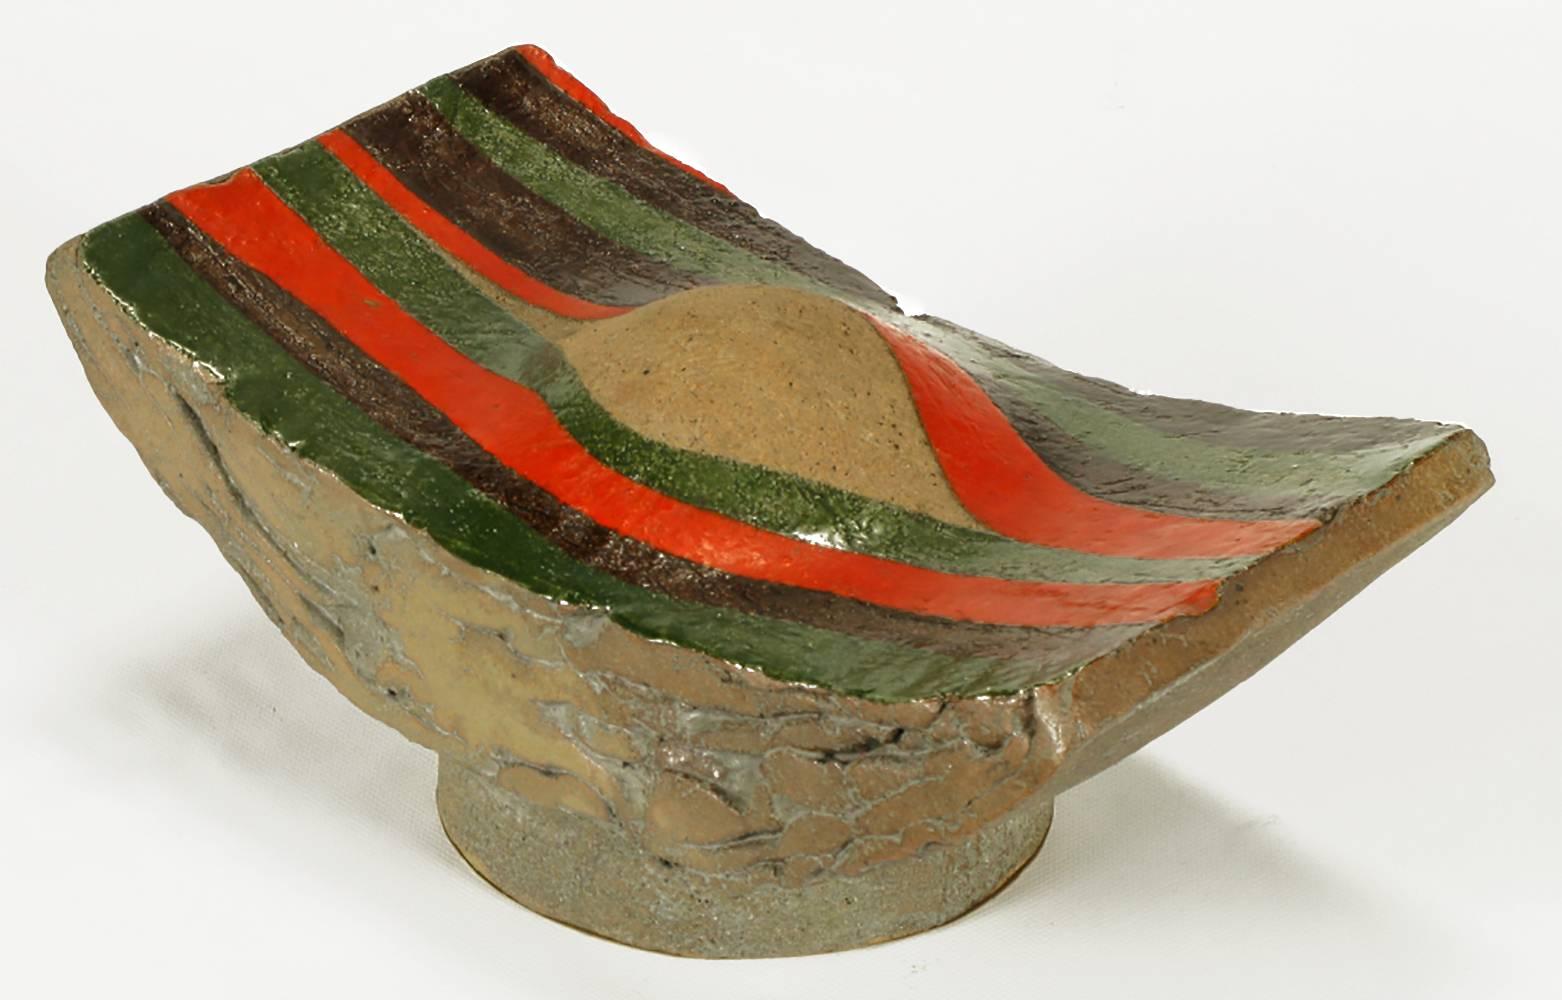 Glazed terra cotta abstract modern sculpture by Tomiya Matsuda. Brown, green and cinnabar glaze over a layered terra cotta curved and footed form with bulbous center. Tomiya Matsuda (1939-2011) studied at the Kyoto University during the late 1950s